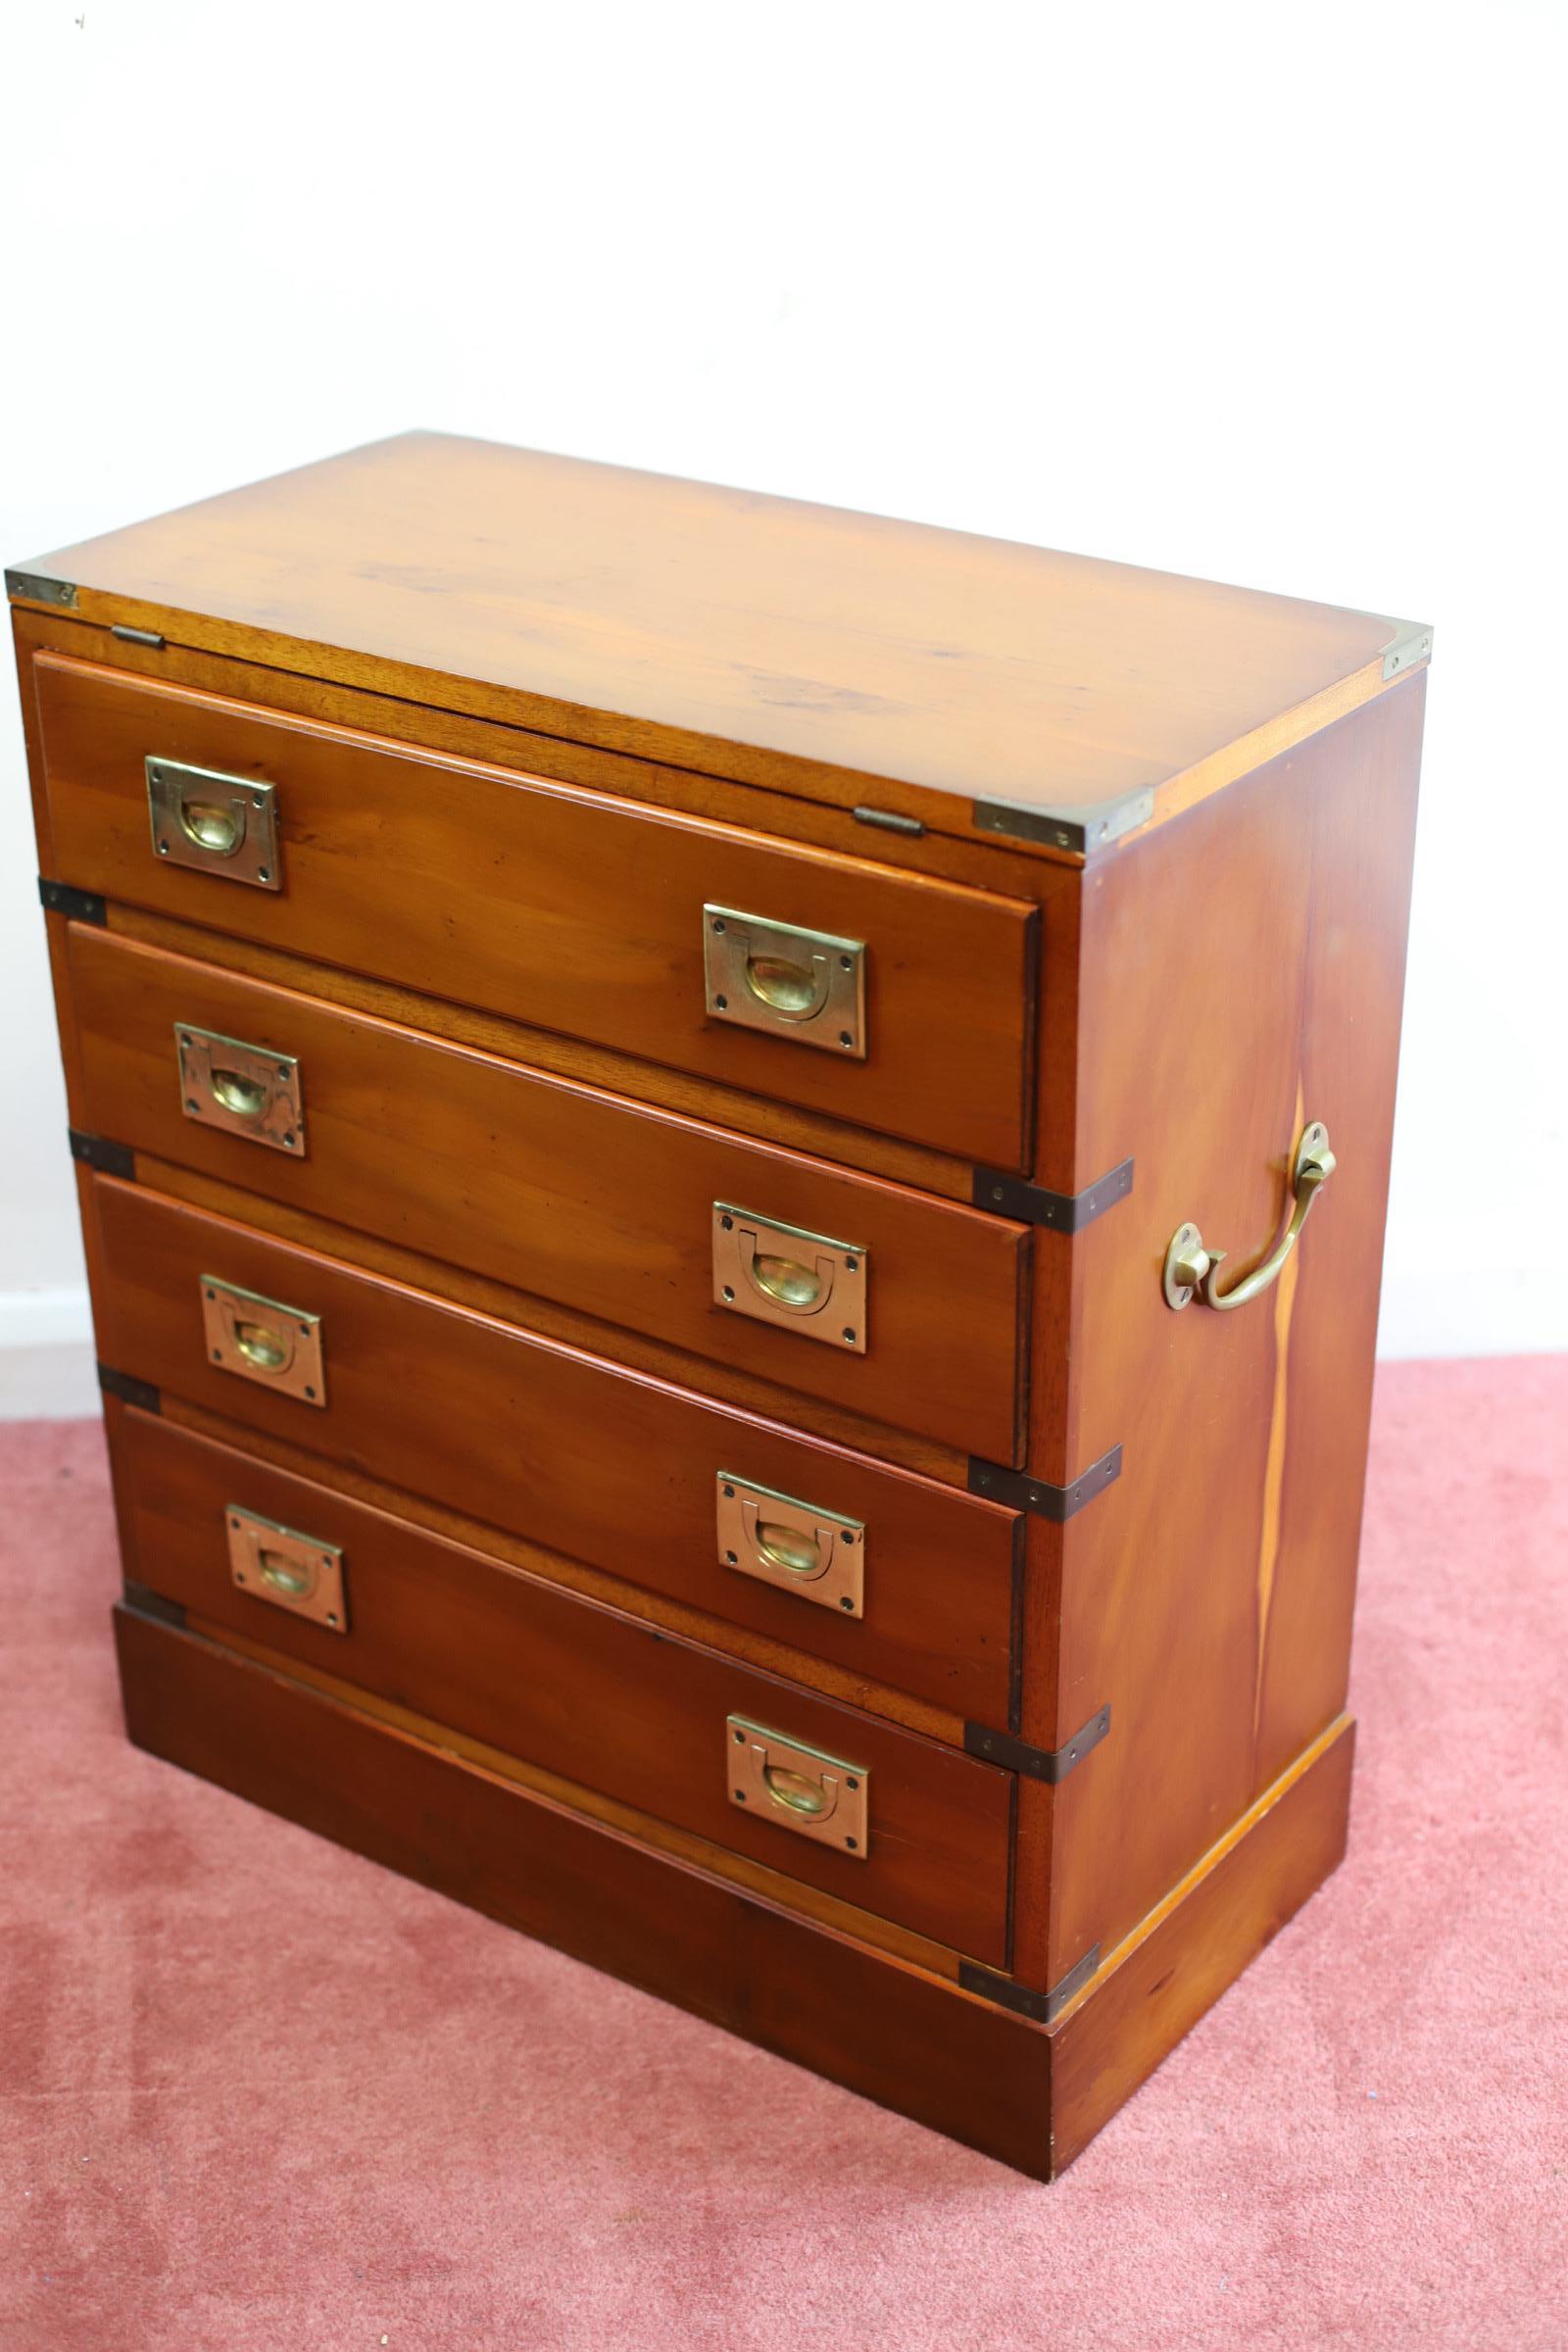 Hand-Crafted Lovelly Small Yew Wood Military Campaign Bachelor’s Chest For Sale